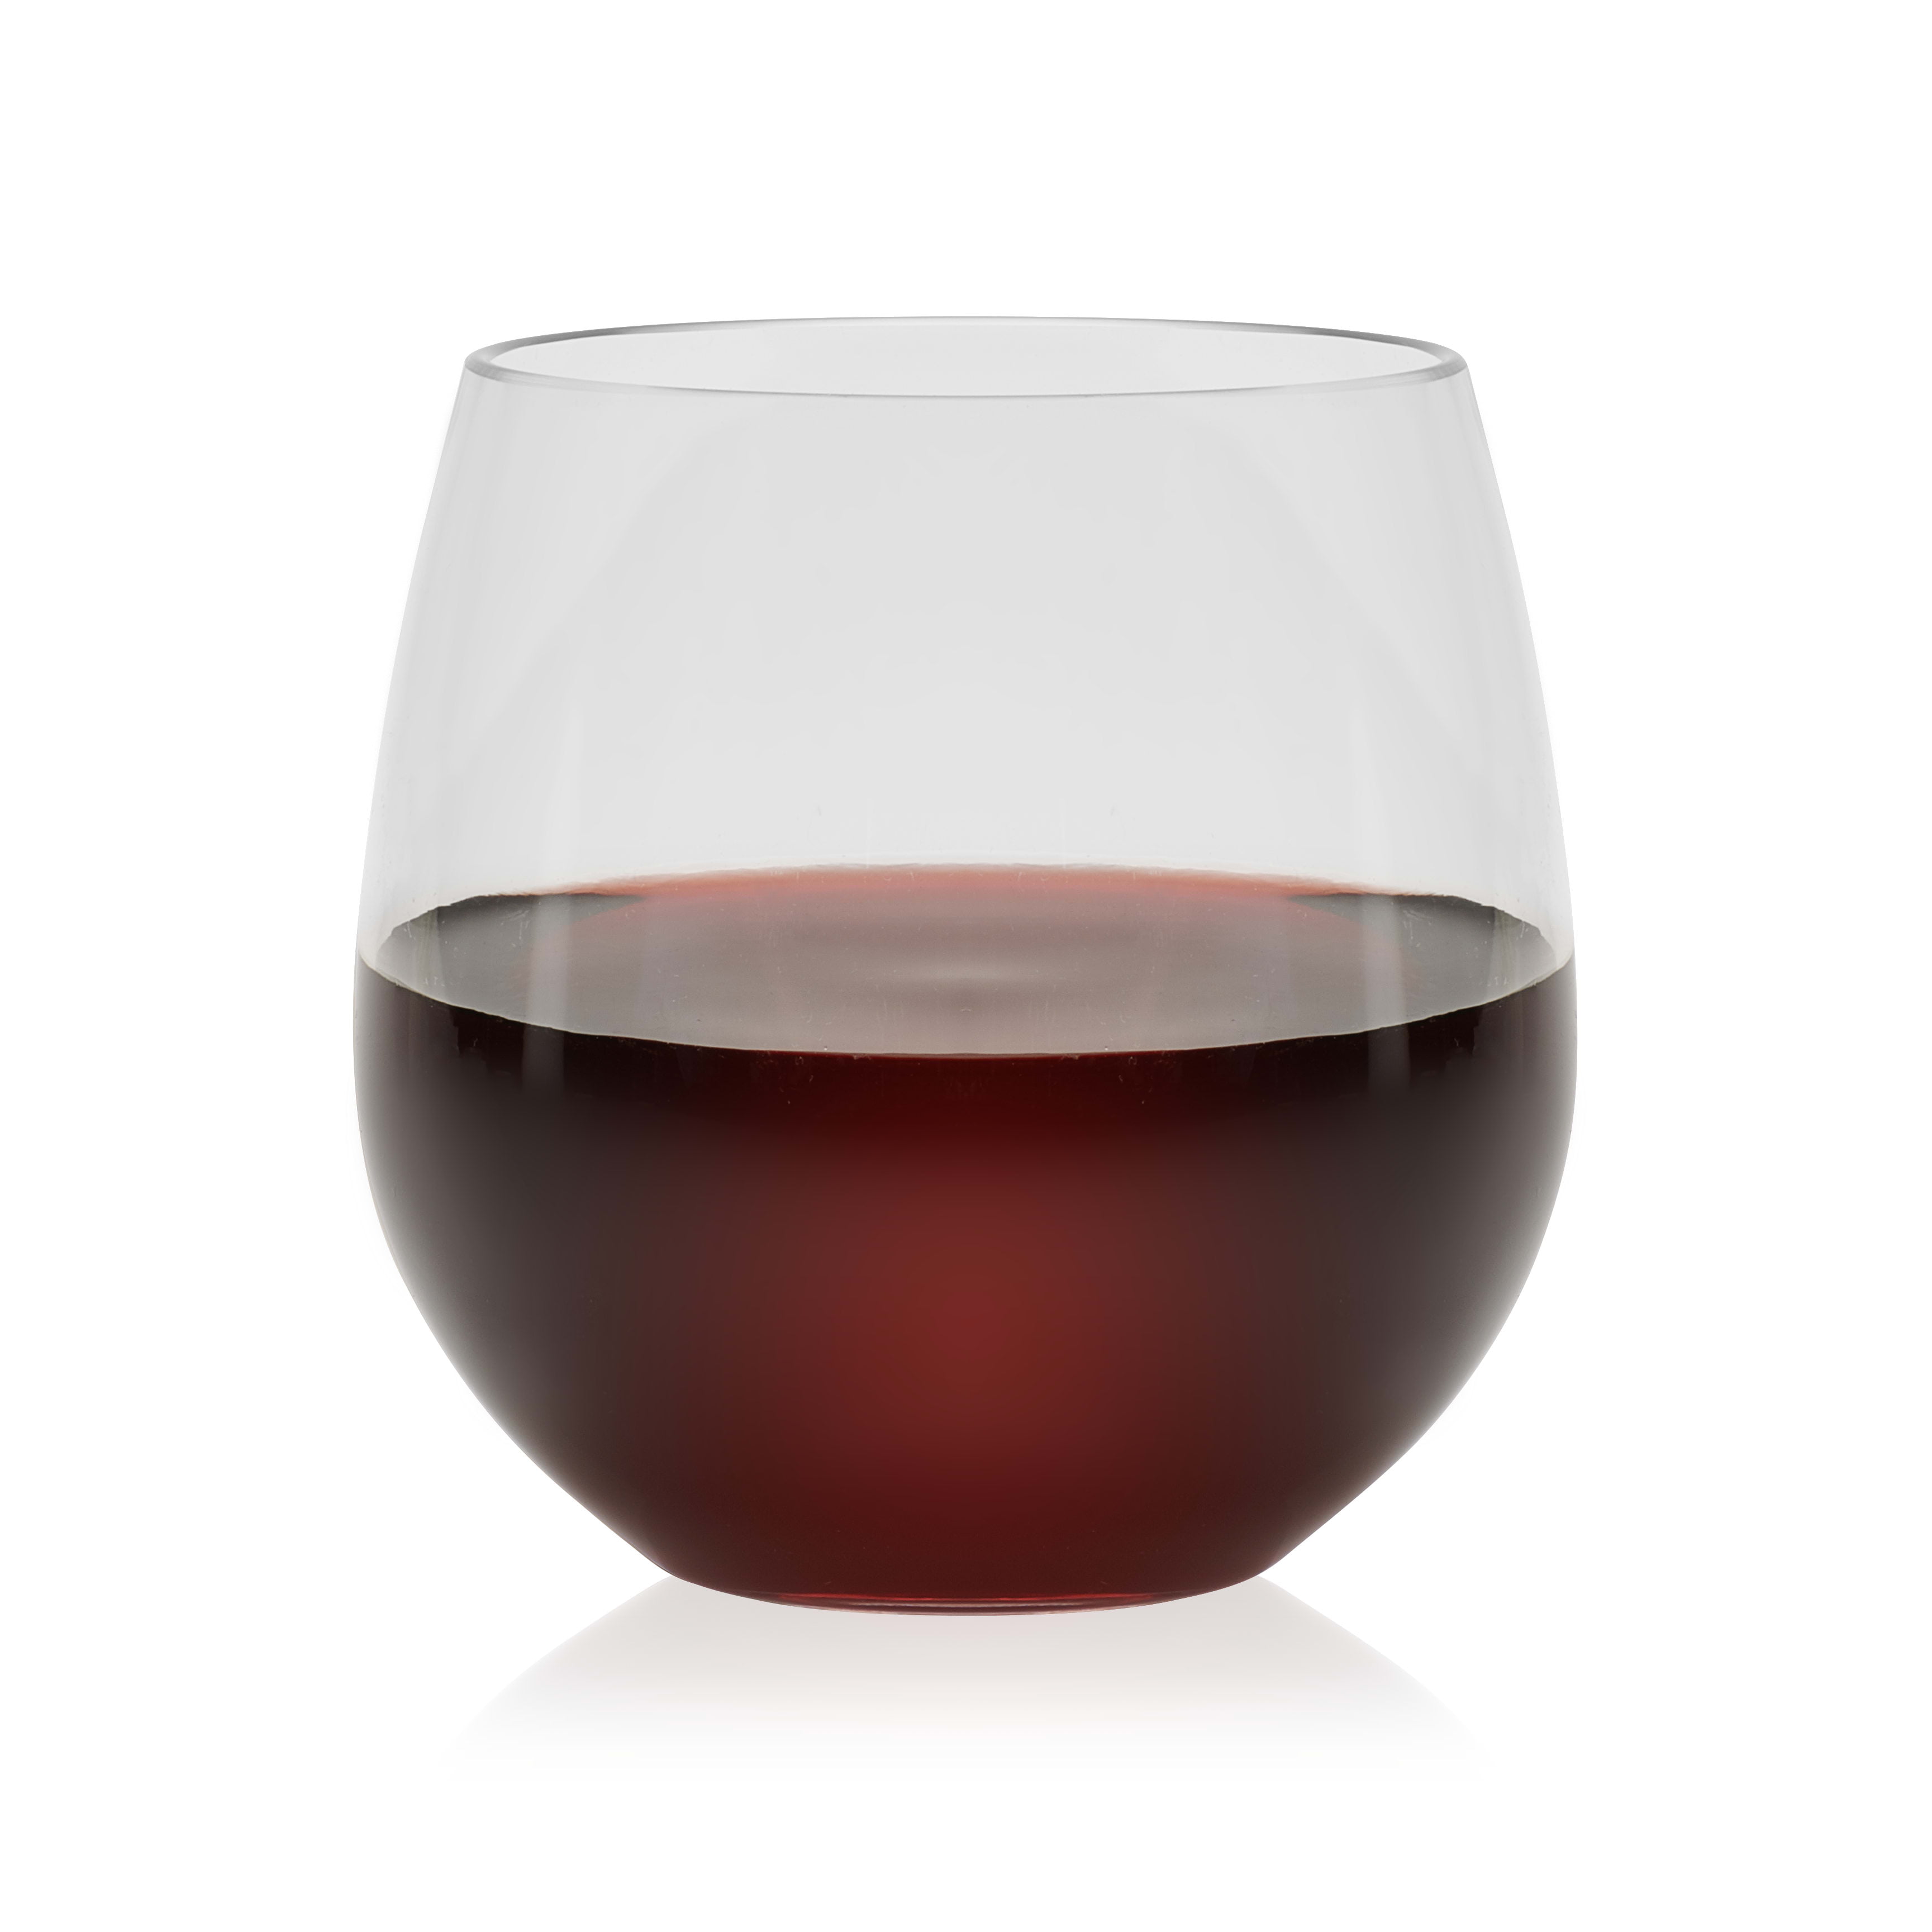 Libbey Indoors Out Break-Resistant Stemless Red Wine Glasses Set